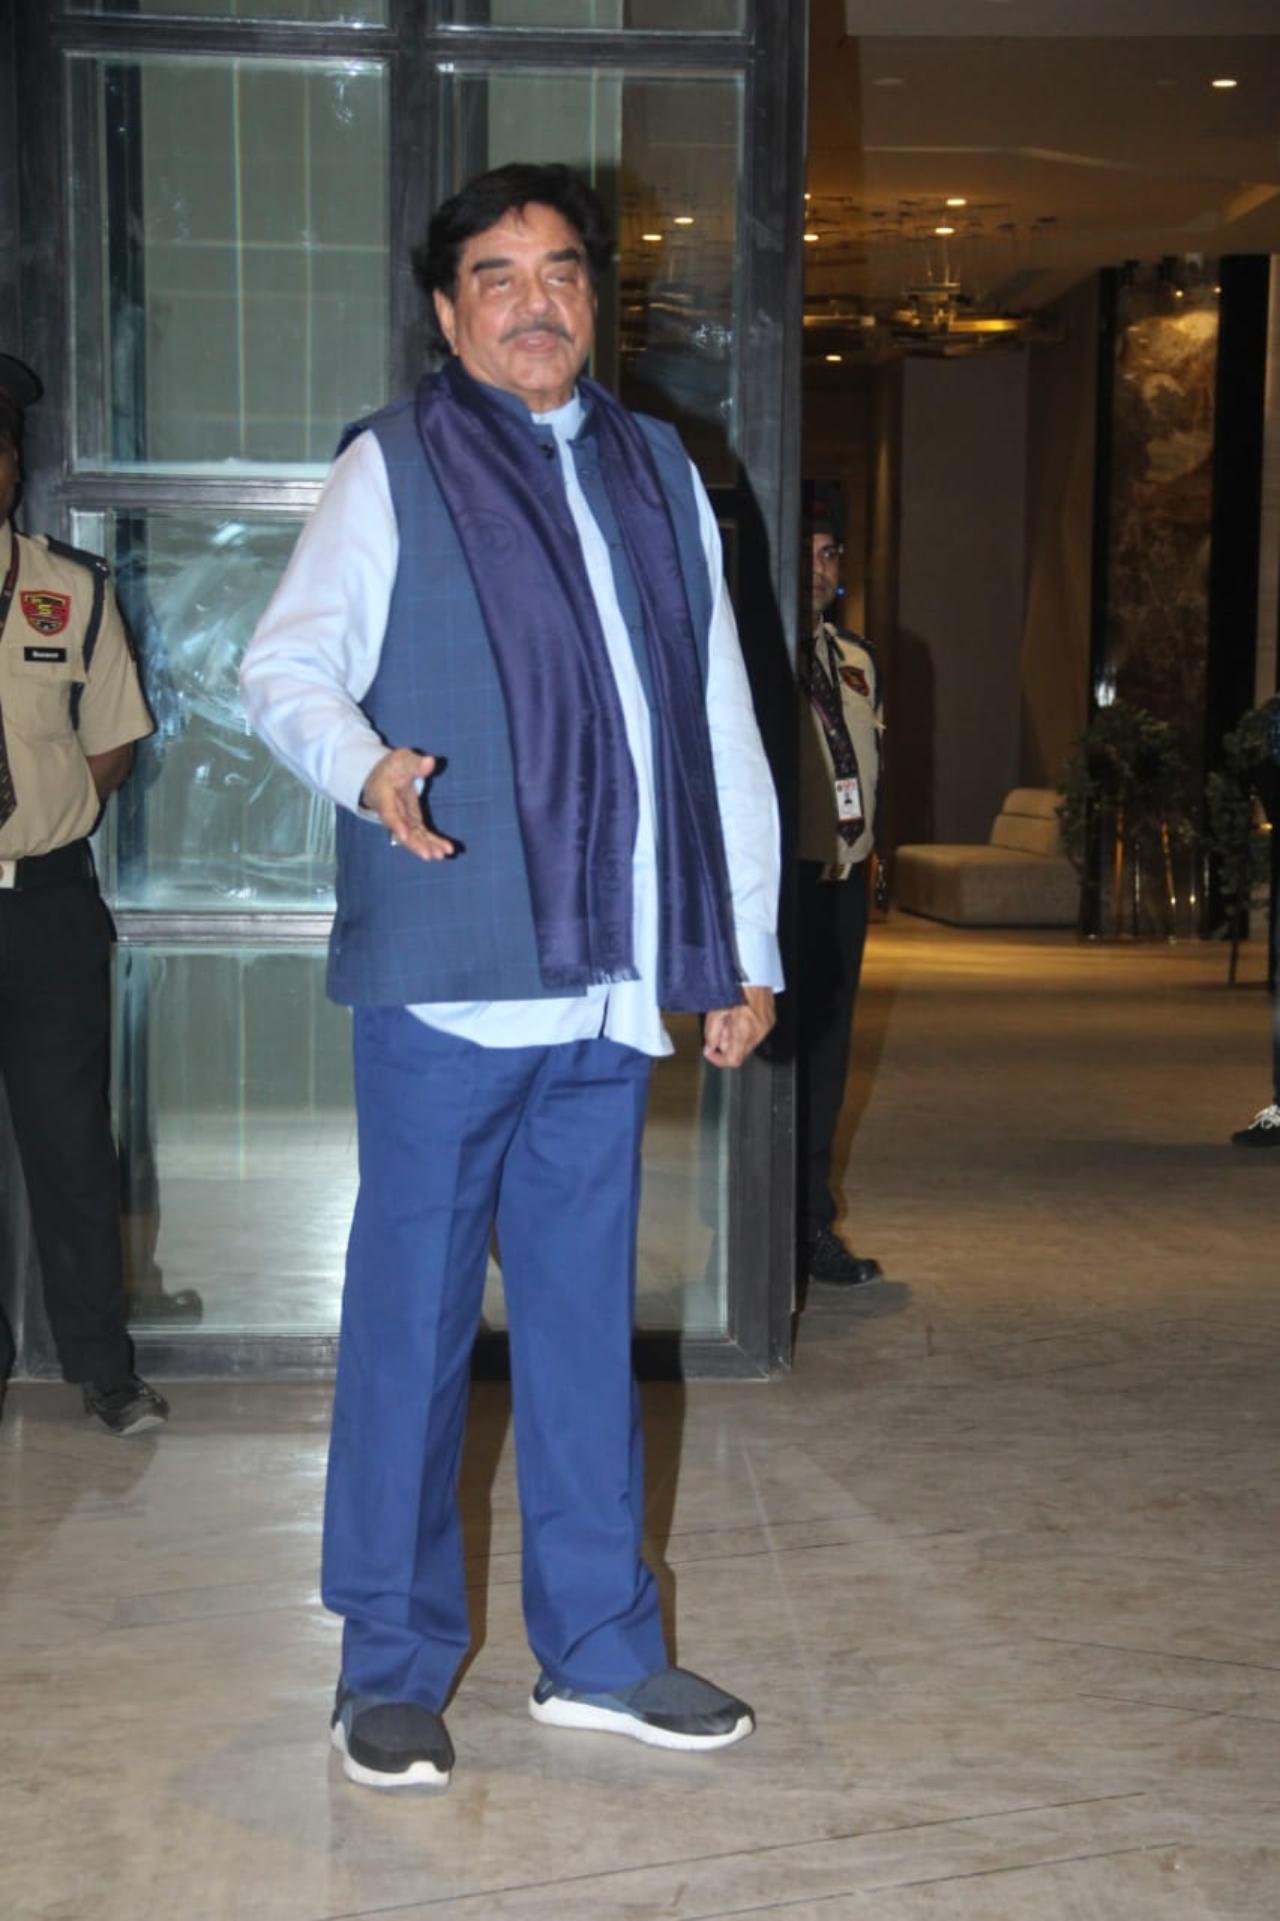 Shatrughan Sinha came dressed in a blue ensemble. He was accompanied by his wife Poonam Sinha